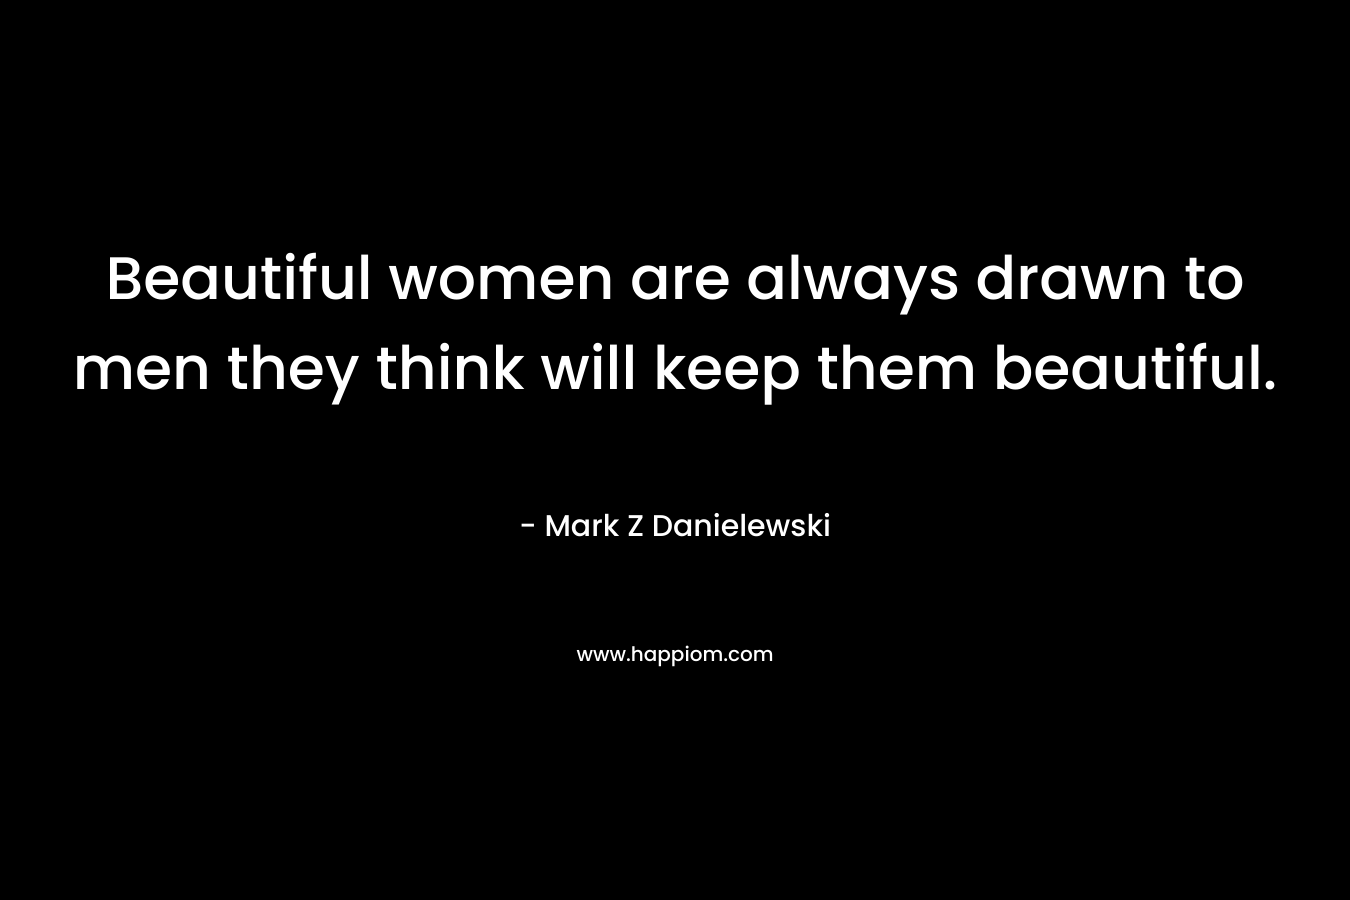 Beautiful women are always drawn to men they think will keep them beautiful.